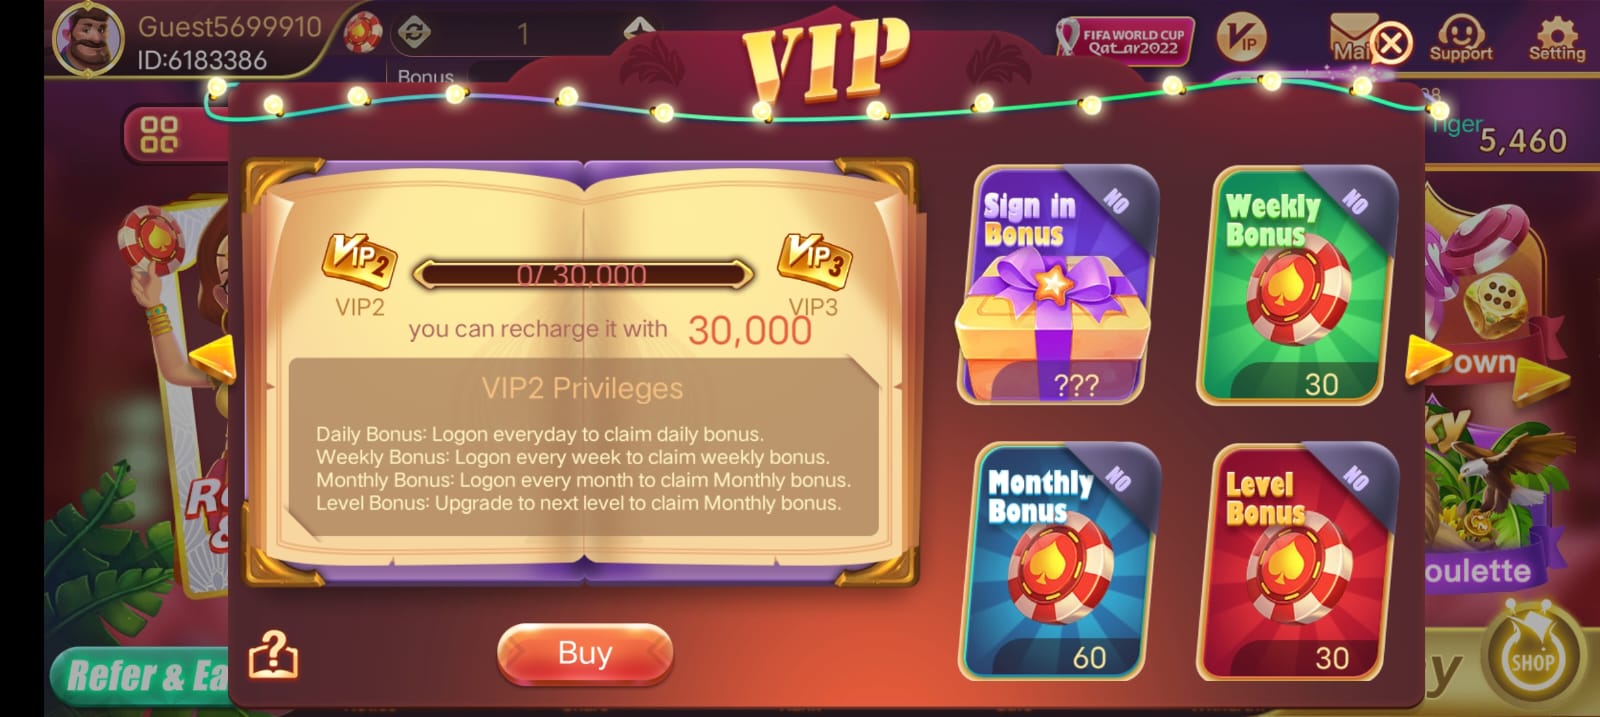 VIP Program In Rummy Most Application